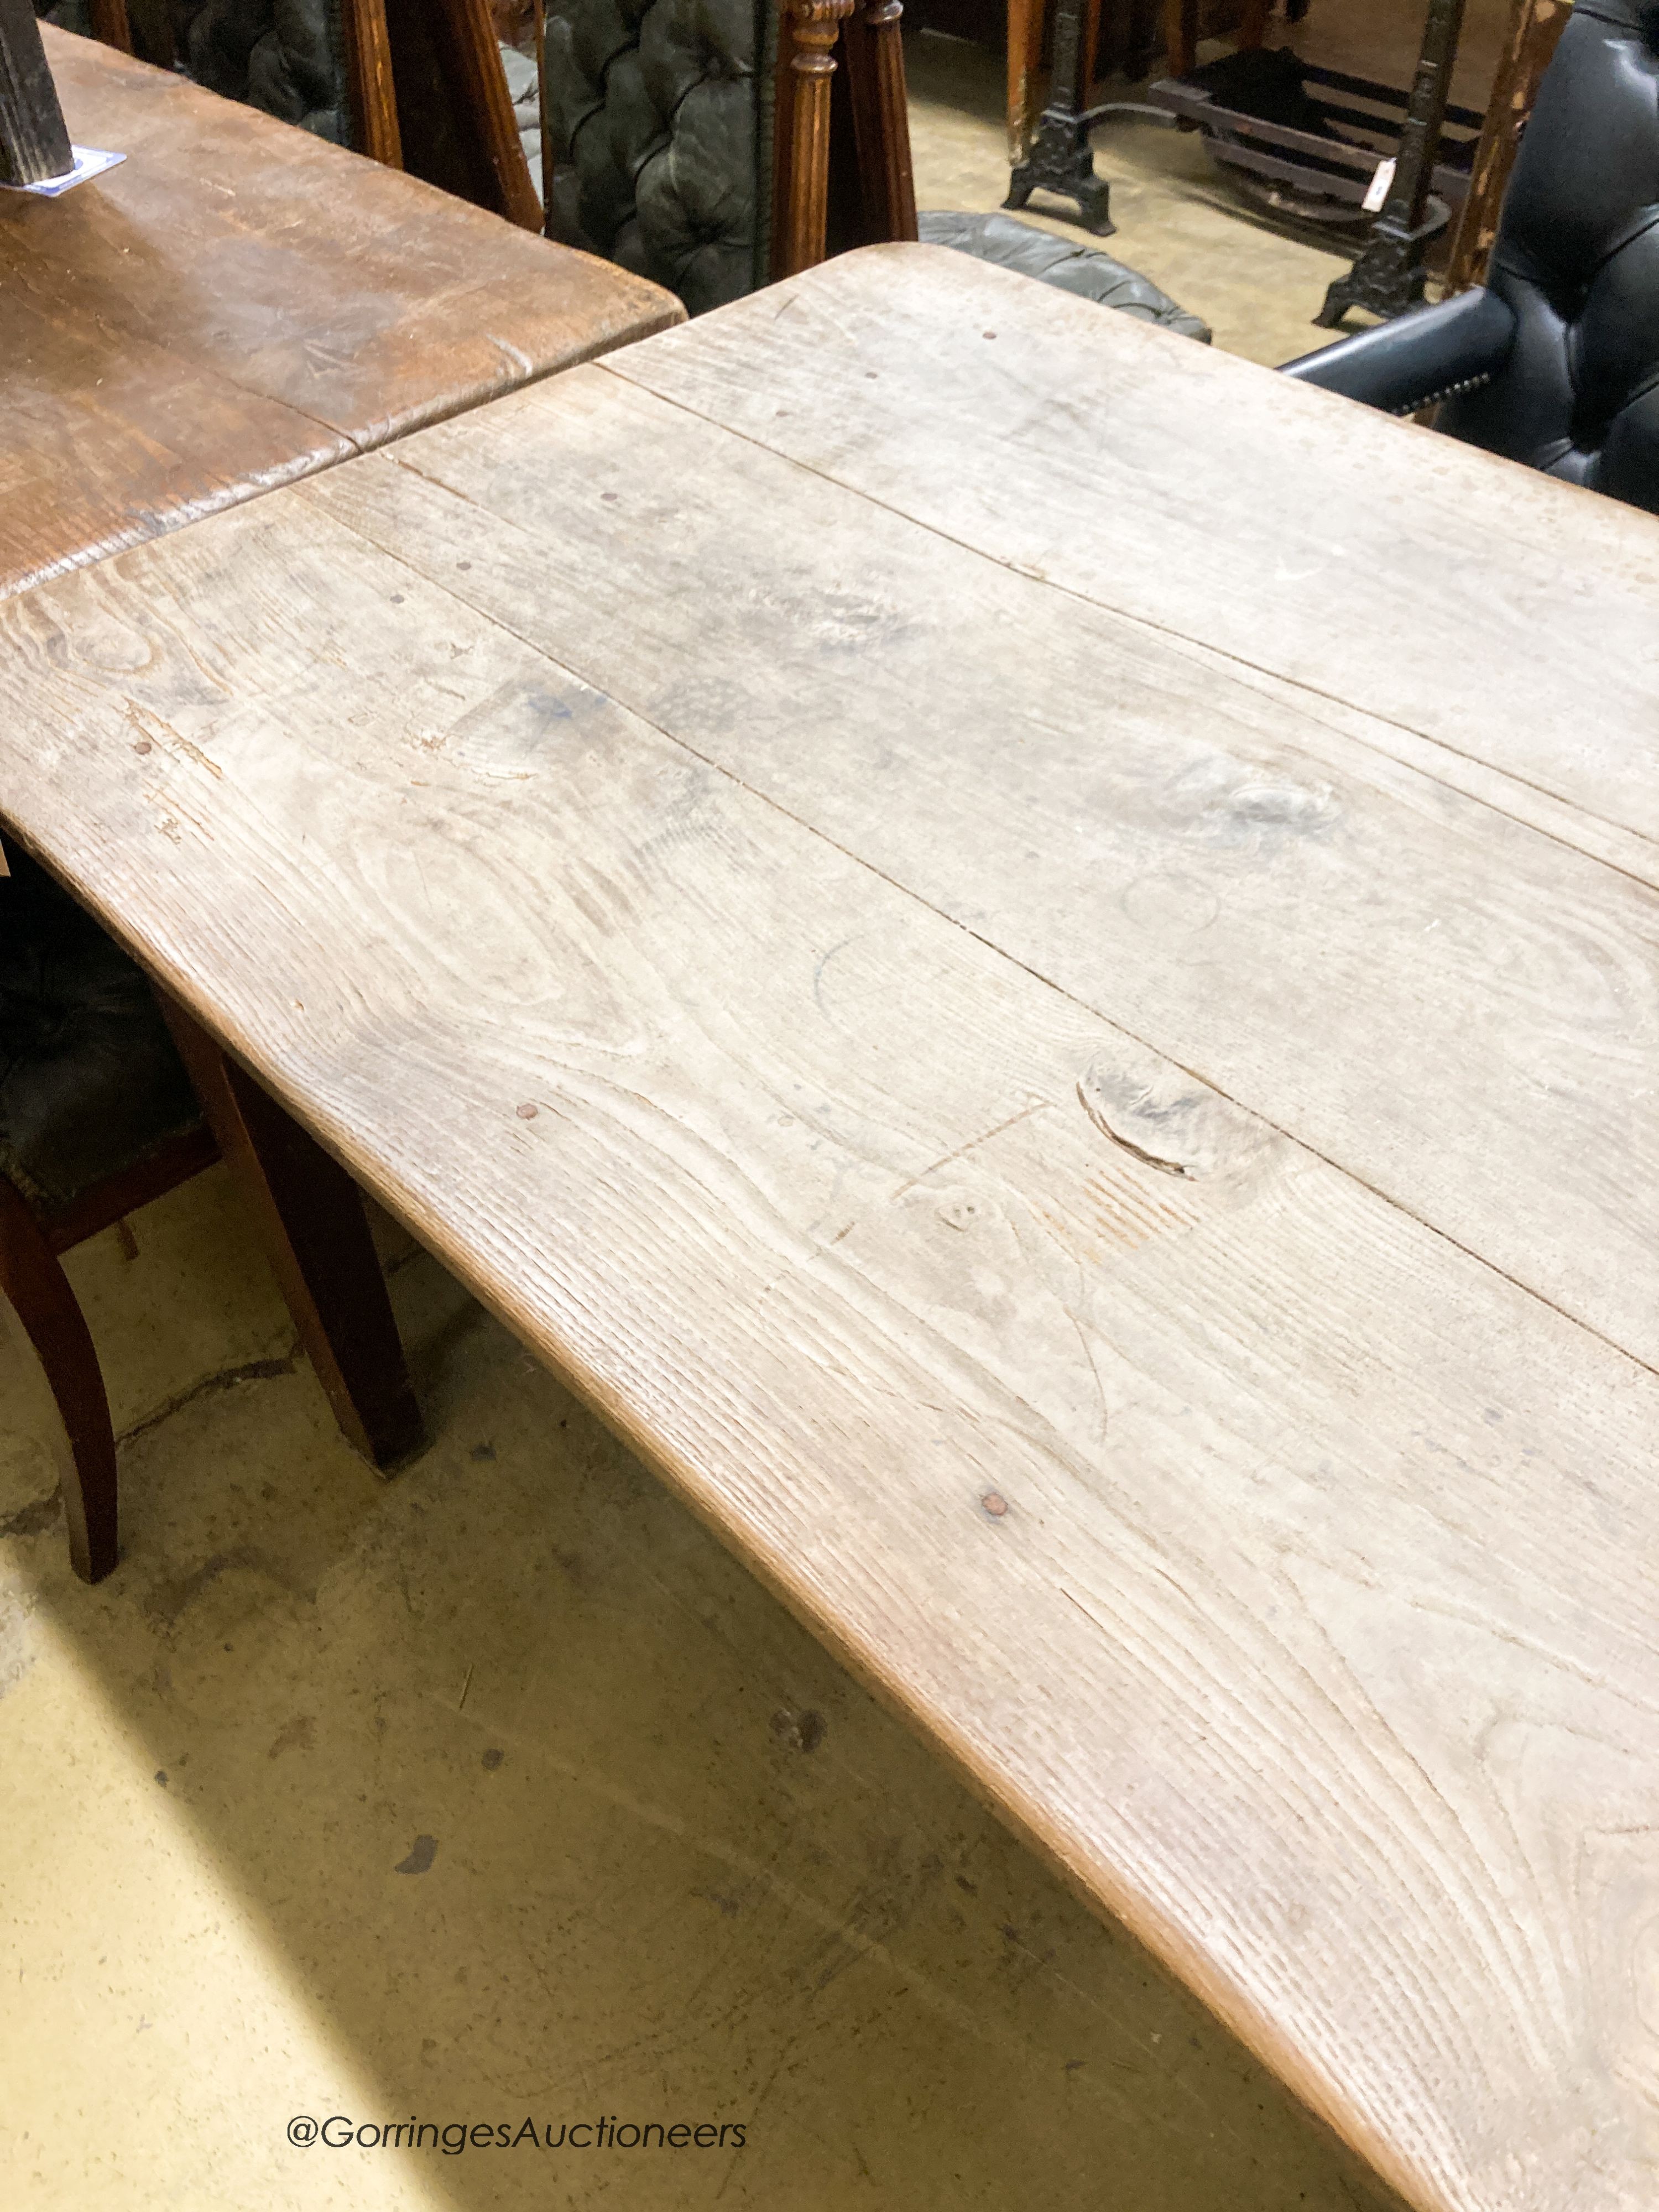 A French oak and fruitwood single end drawer farmhouse table, length 190cm, depth 89cm, height 73cm